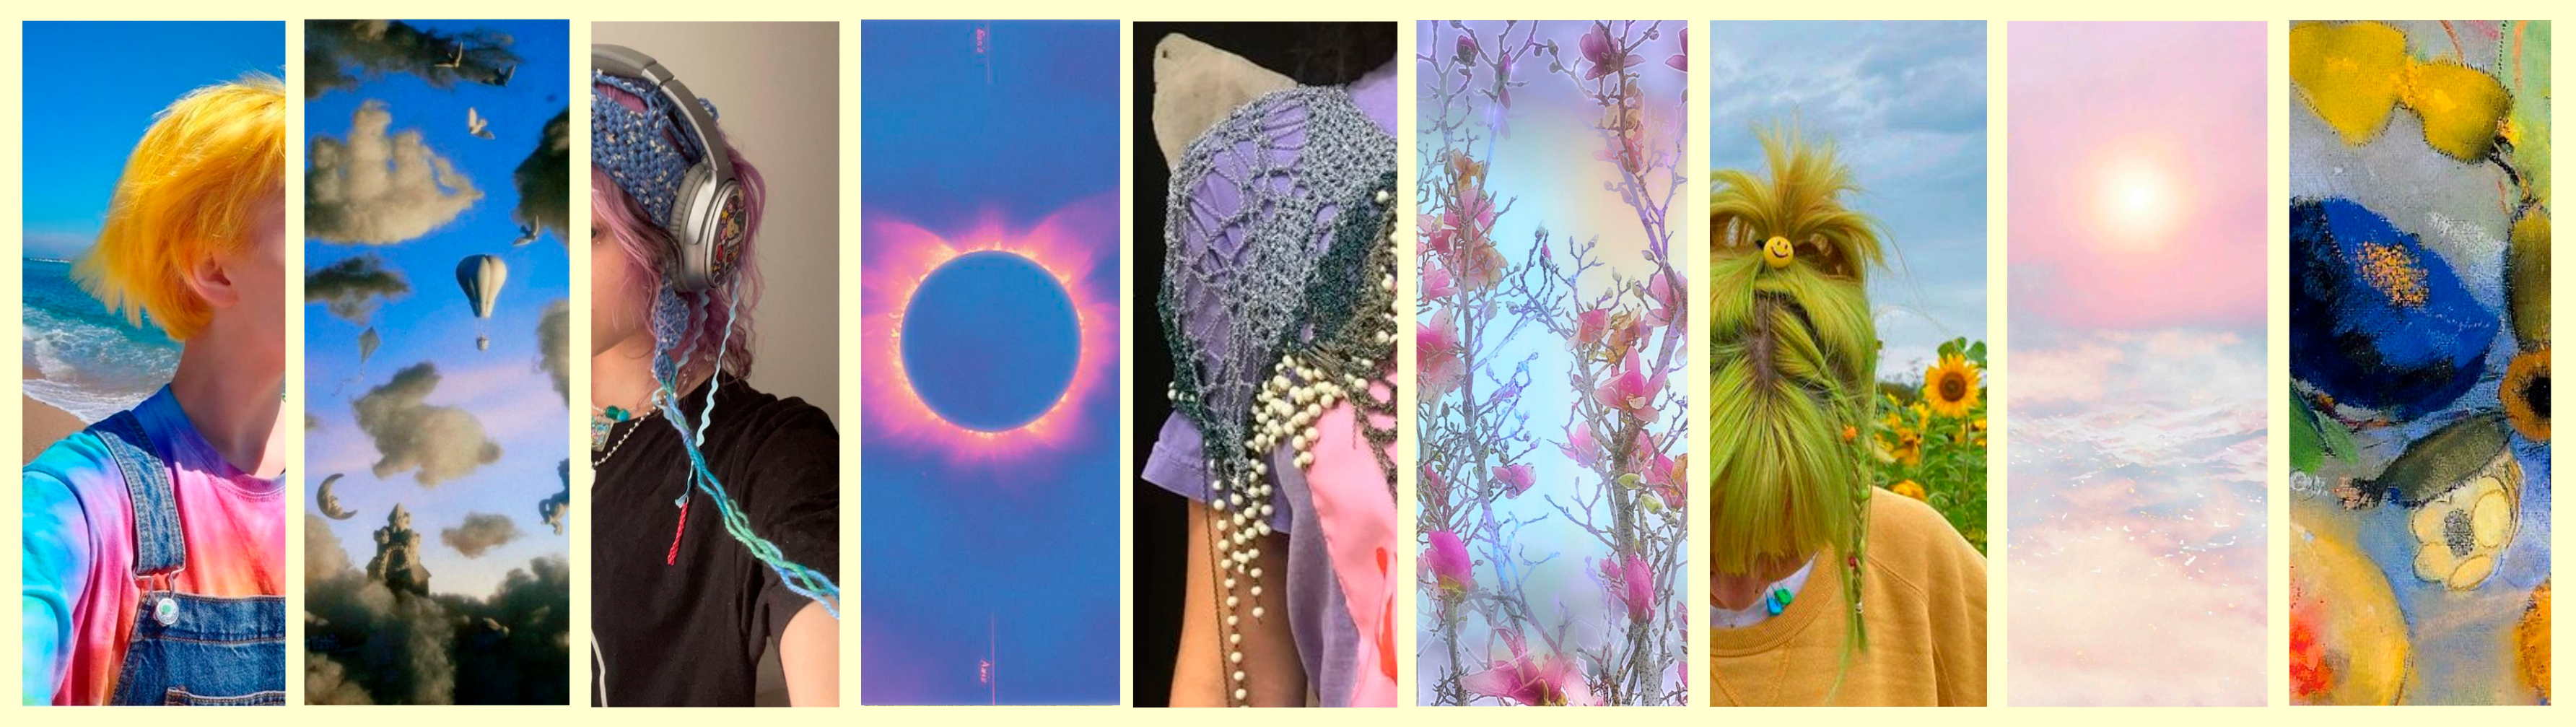 Photo collage of clothes, haircuts, flowers, a solar eclipse, a sunrise on the beach and clouds, representing Nethamet's style.